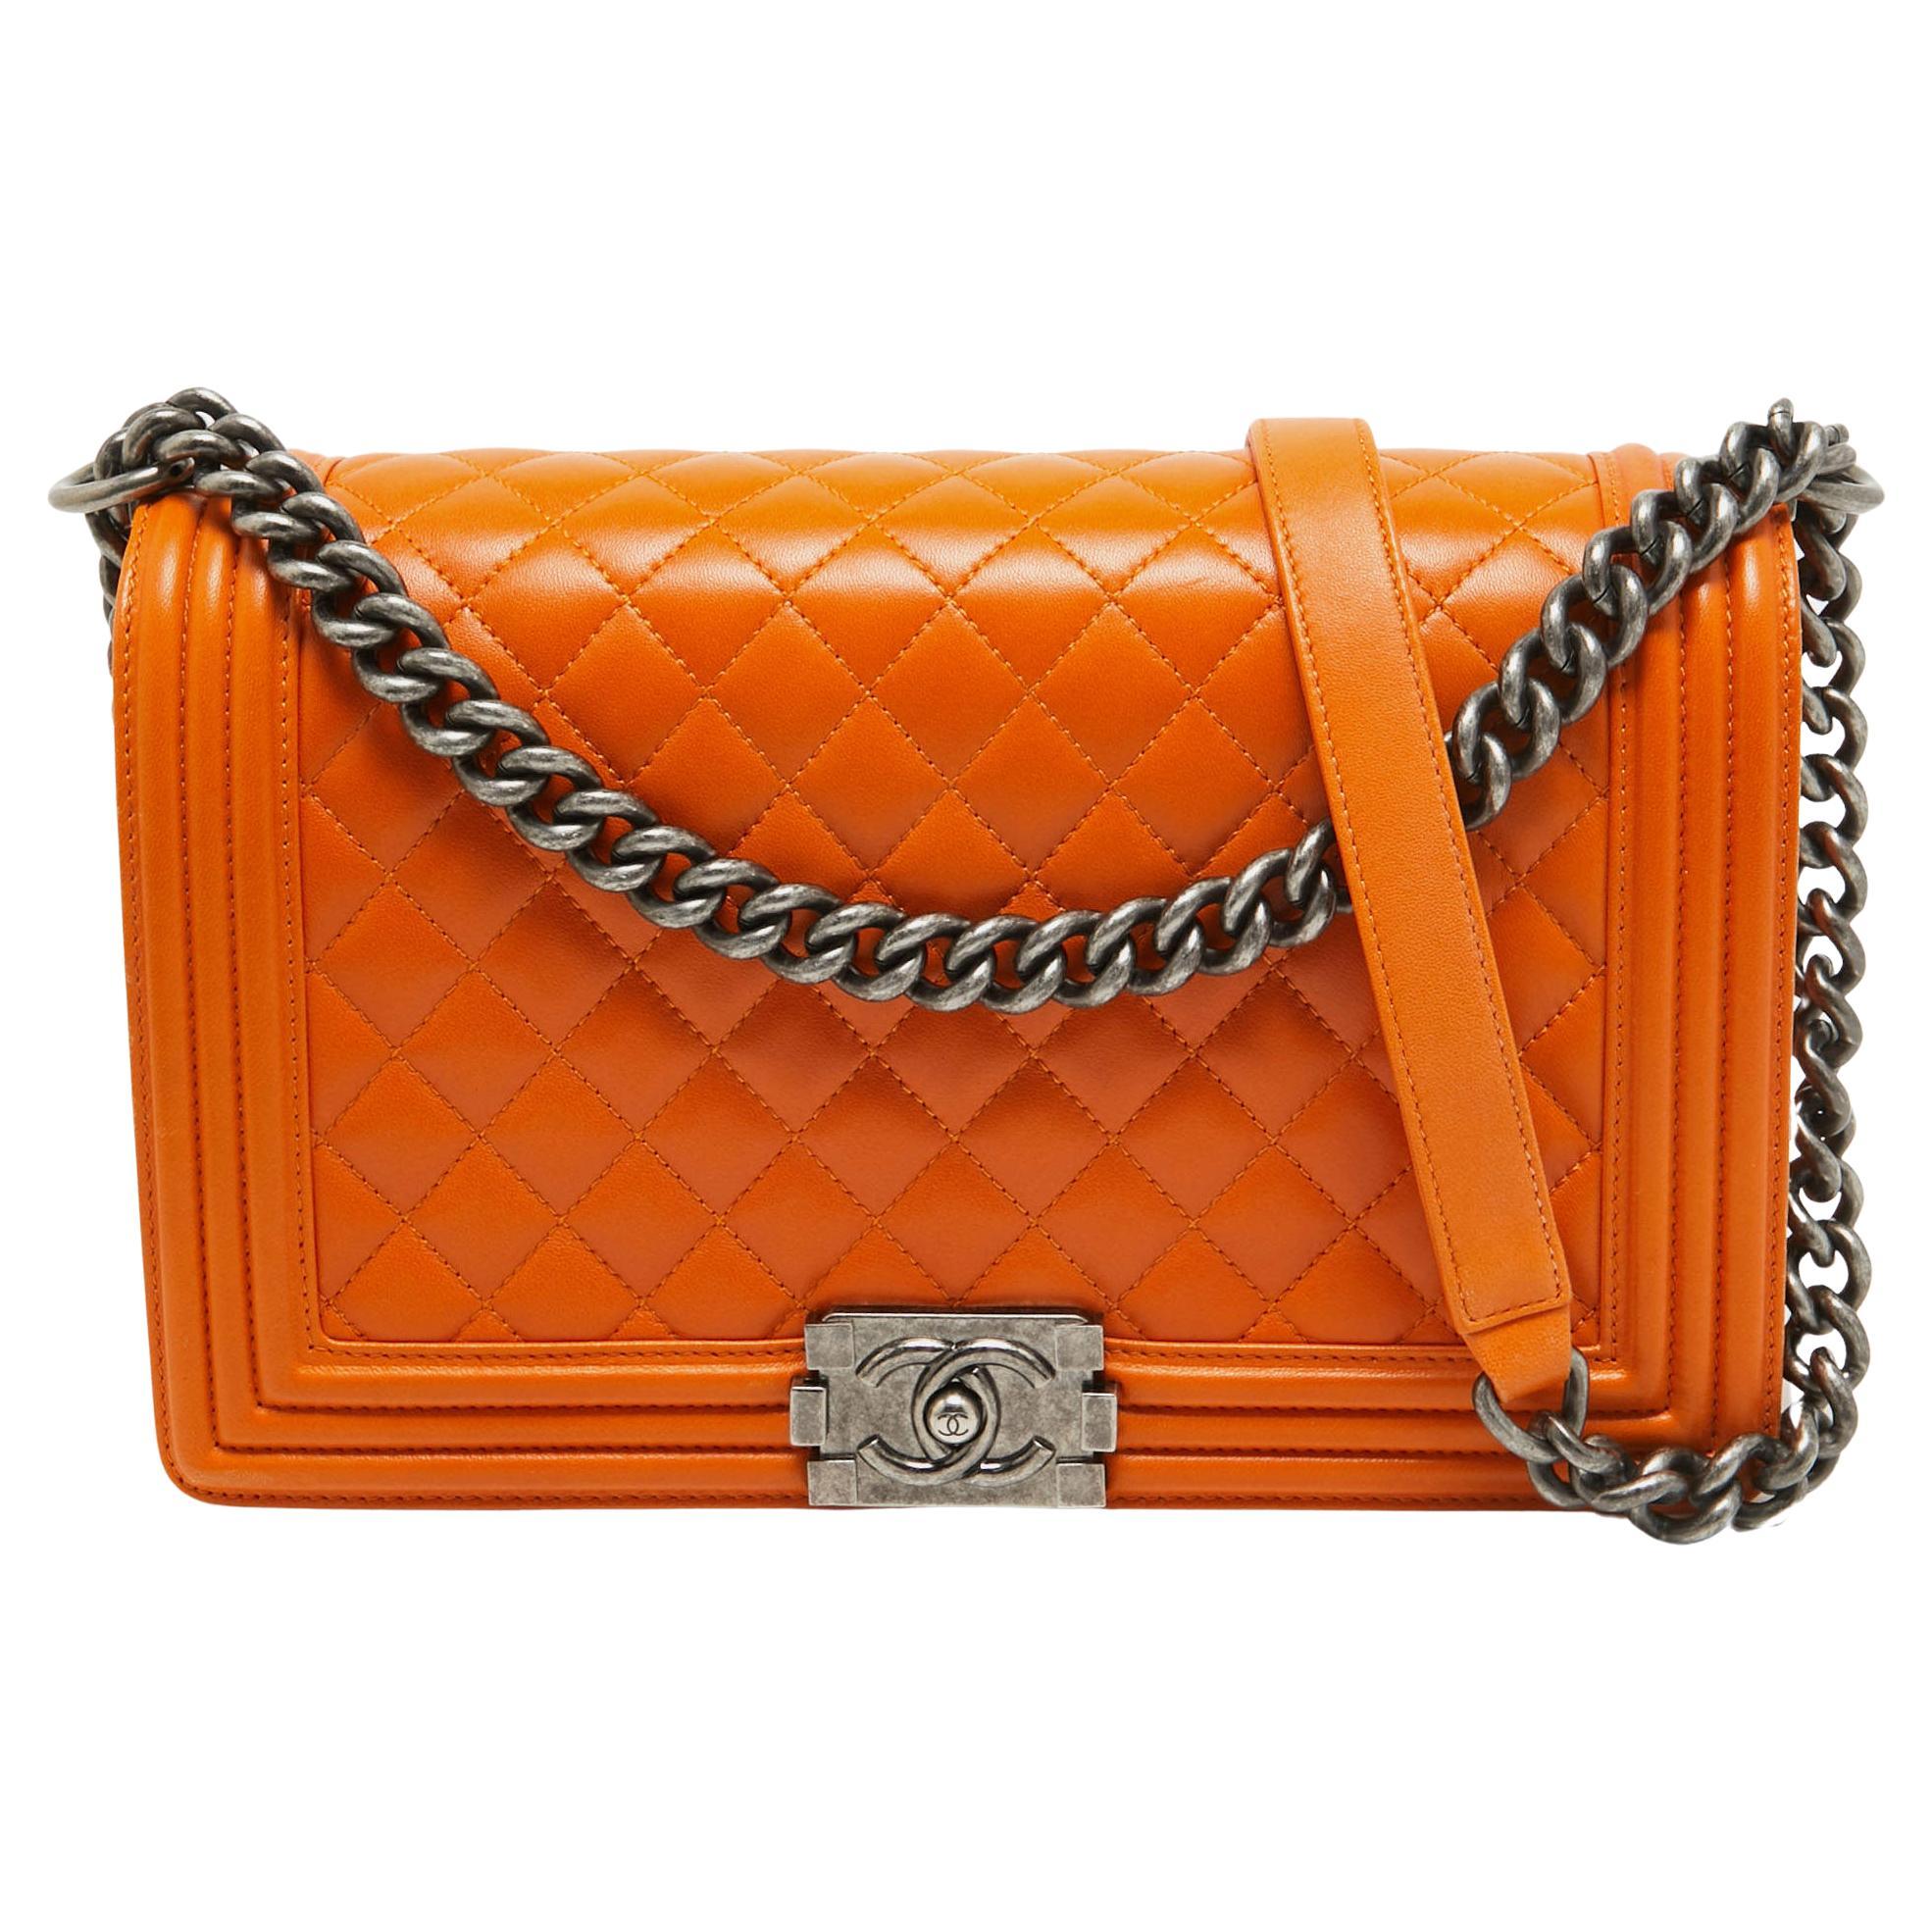 Chanel Orange Quilted Leather New Medium Boy Bag For Sale